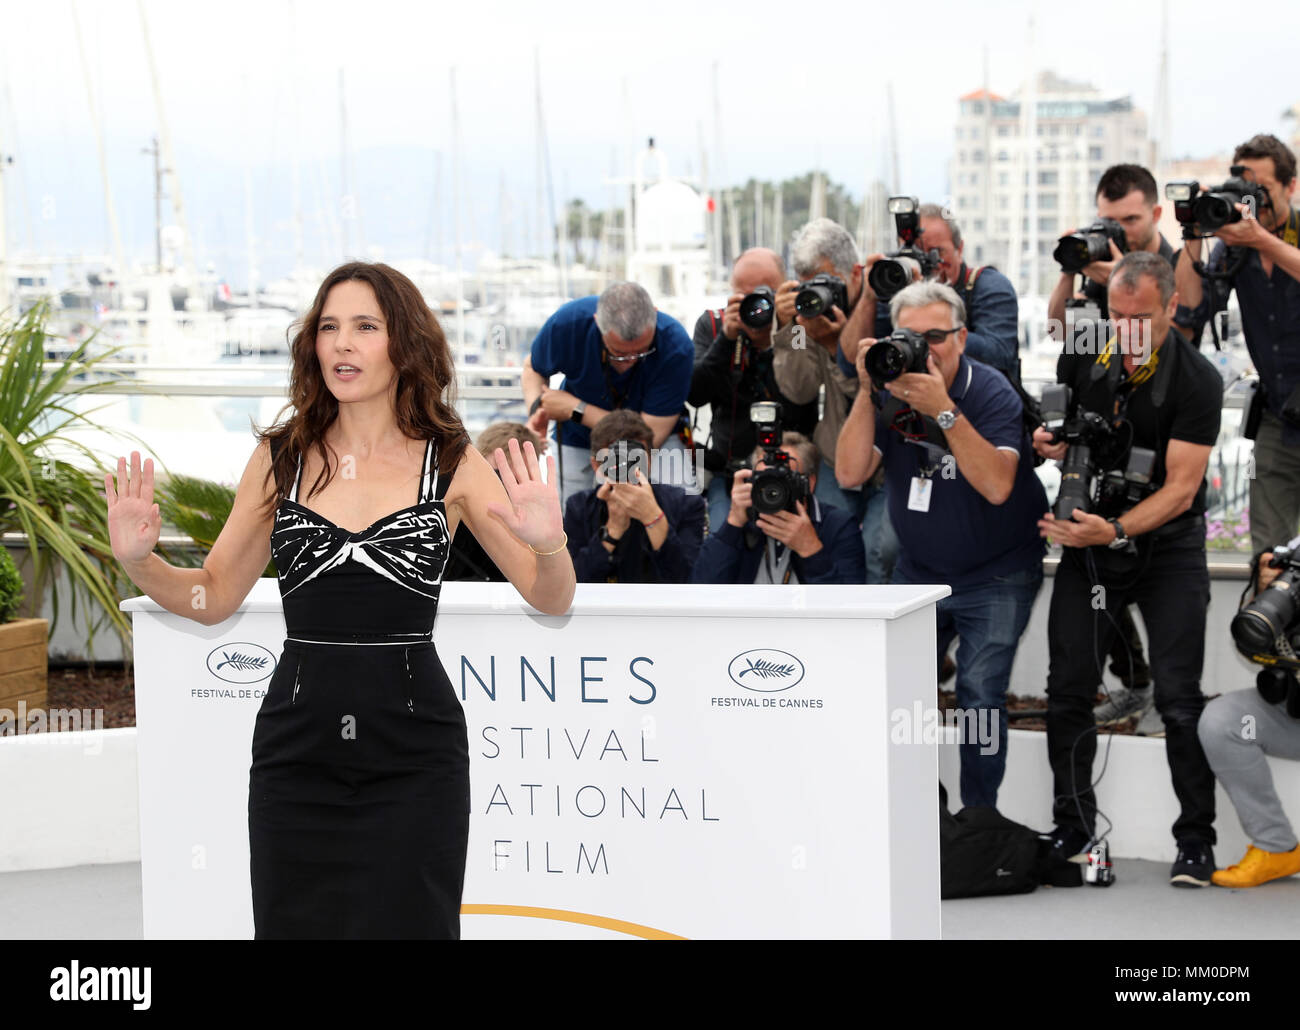 Cannes. 9th May, 2018. Un Certain Regard jury member Virginie Ledoyen attends the Jury Un Certain Regard photocall during the 71st annual Cannes Film Festival at Palais des Festivals in Cannes, France, on May 9, 2018 Credit: Luo Huanhuan/Xinhua/Alamy Live News Stock Photo